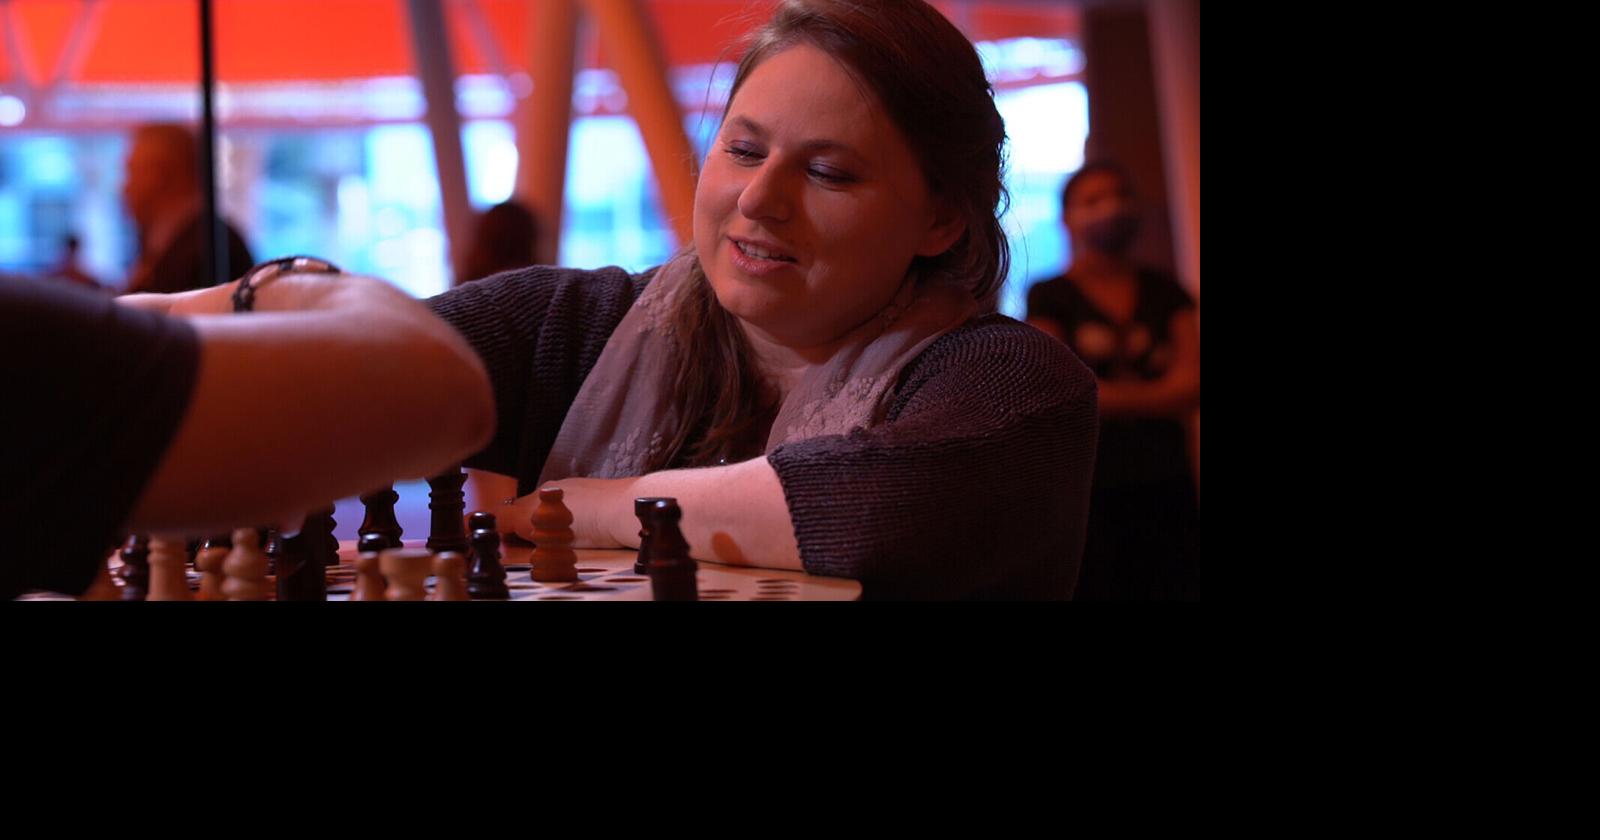 Chess Daily News by Susan Polgar - Queen of the board